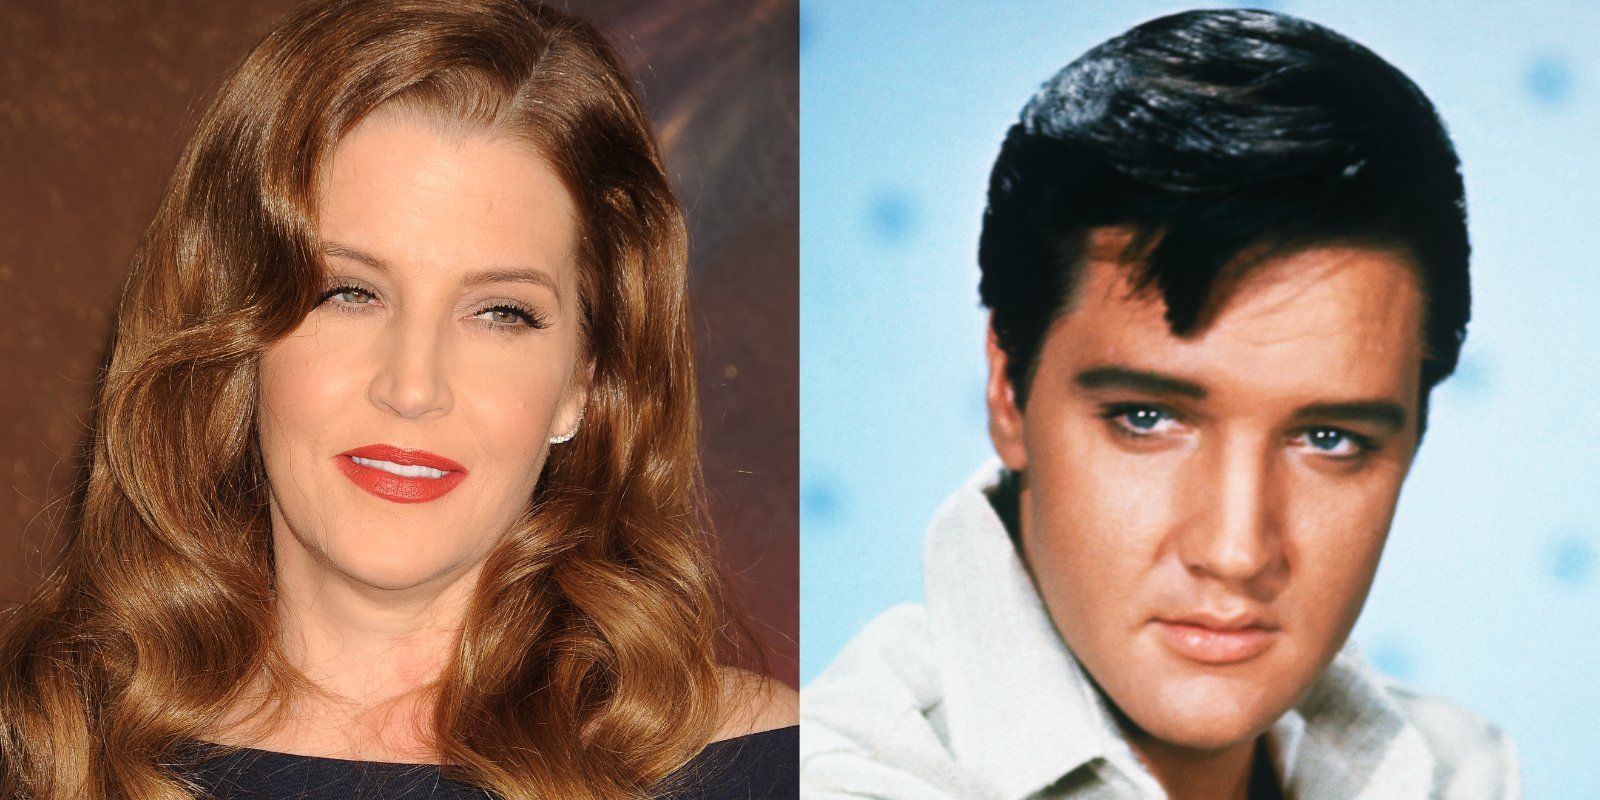 Lisa Marie Presley and Elvis Presley in a set of side by side photographs.